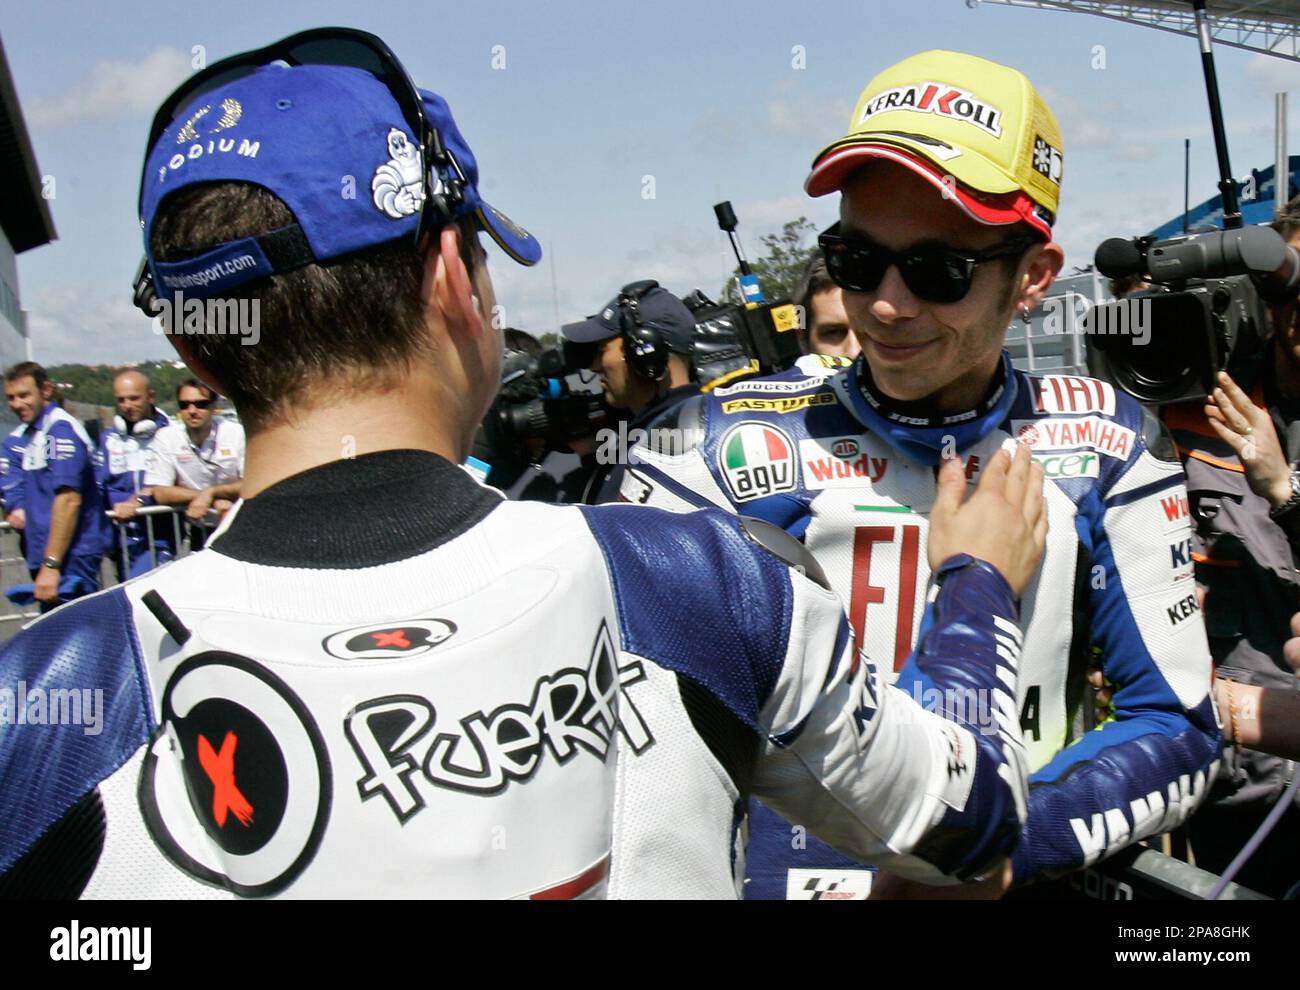 Yamaha MotoGP rider Jorge Lorenzo, left, from Spain, reacts with teammate  Valentino Rossi, from Italy, Saturday, April 12, 2008, at the end of  qualifying for Sunday's Portugal Motorcycling Grand Prix at the